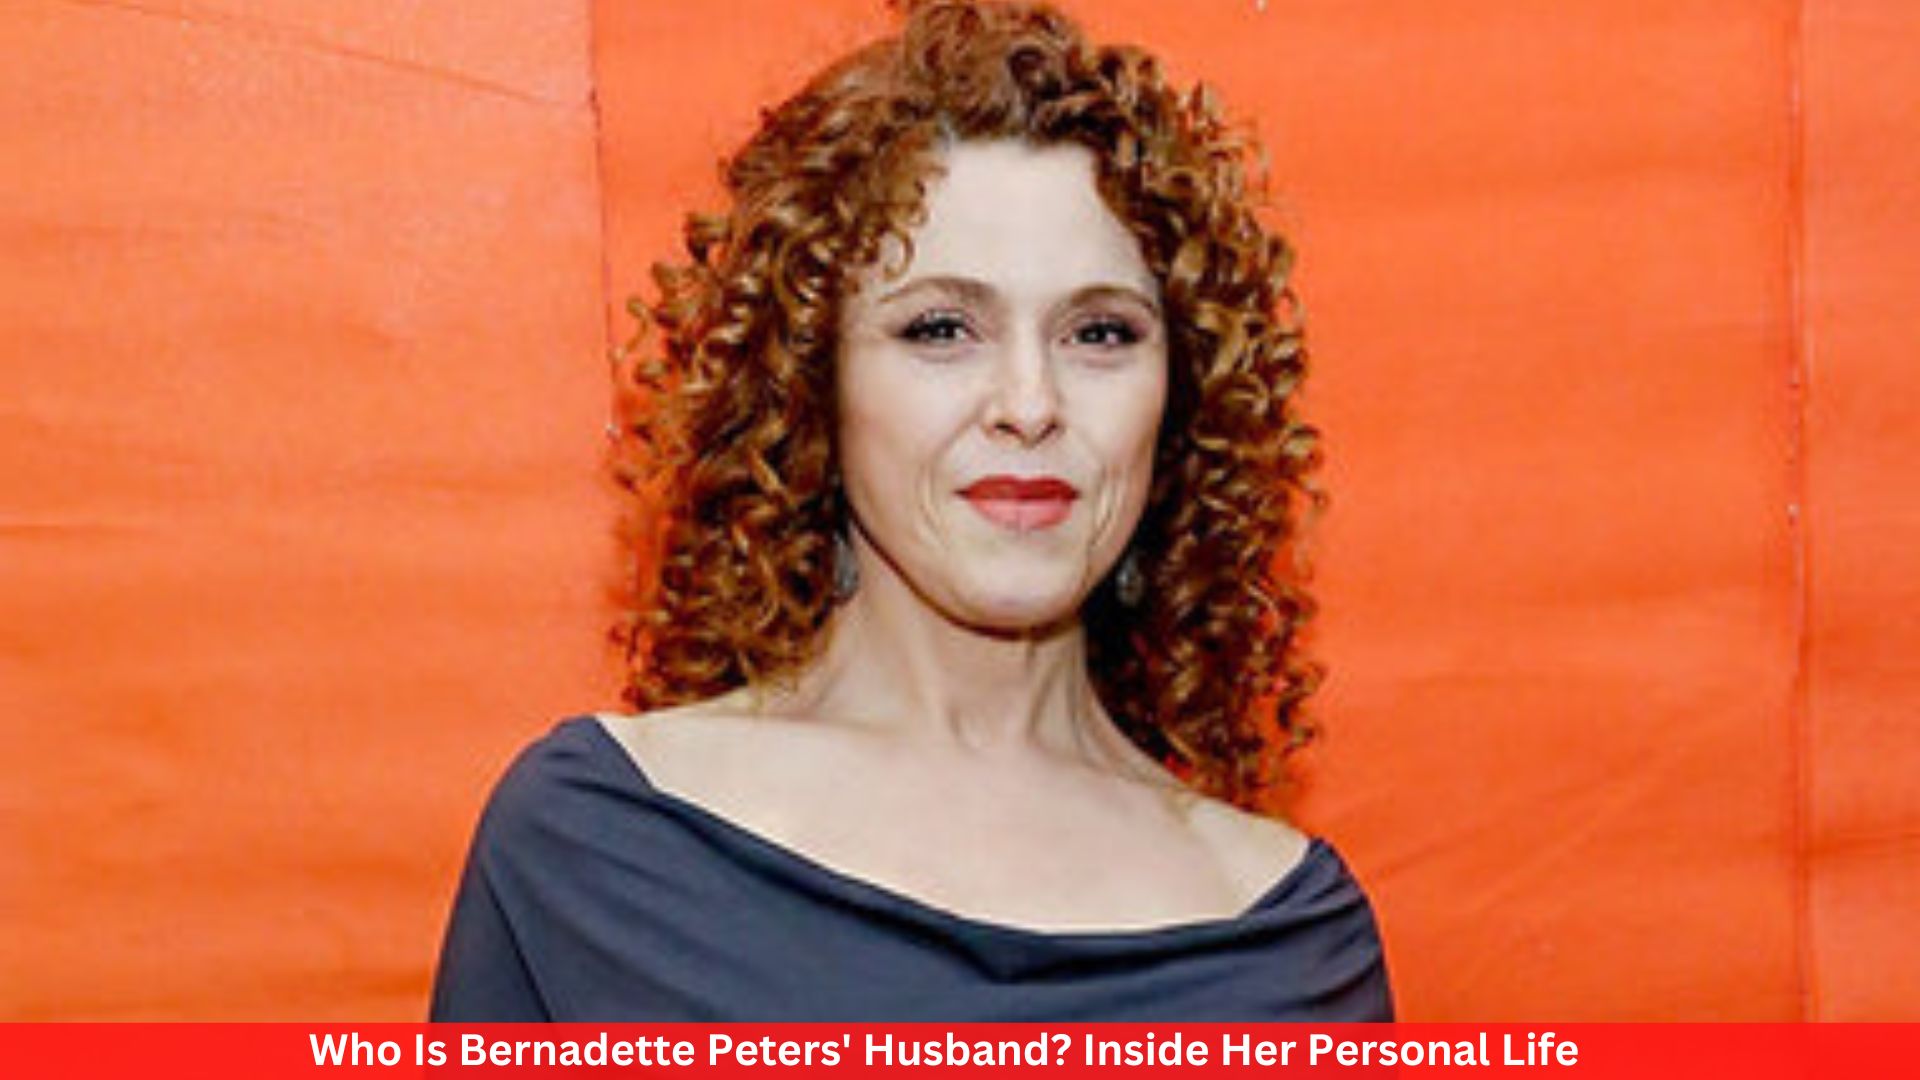 Who Is Bernadette Peters' Husband? Inside Her Personal Life